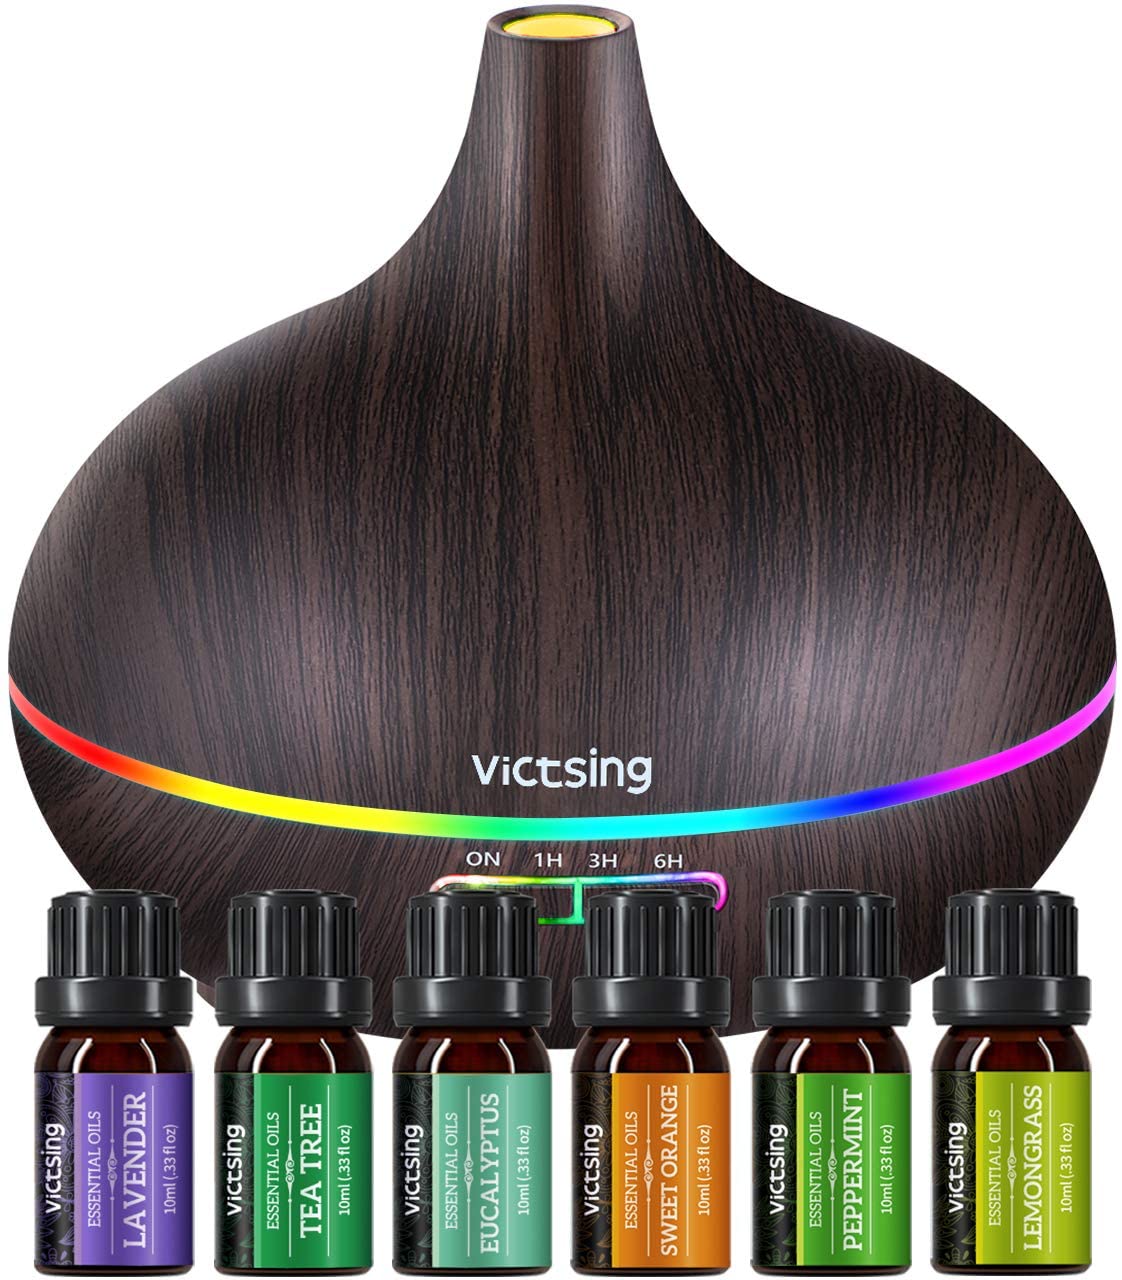 InnoGear Essential Oil Diffuser, Upgraded Diffusers for Essential Oils  Aromatherapy Diffuser Cool Mist Humidifier with 7 Colors Lights 2 Mist Mode